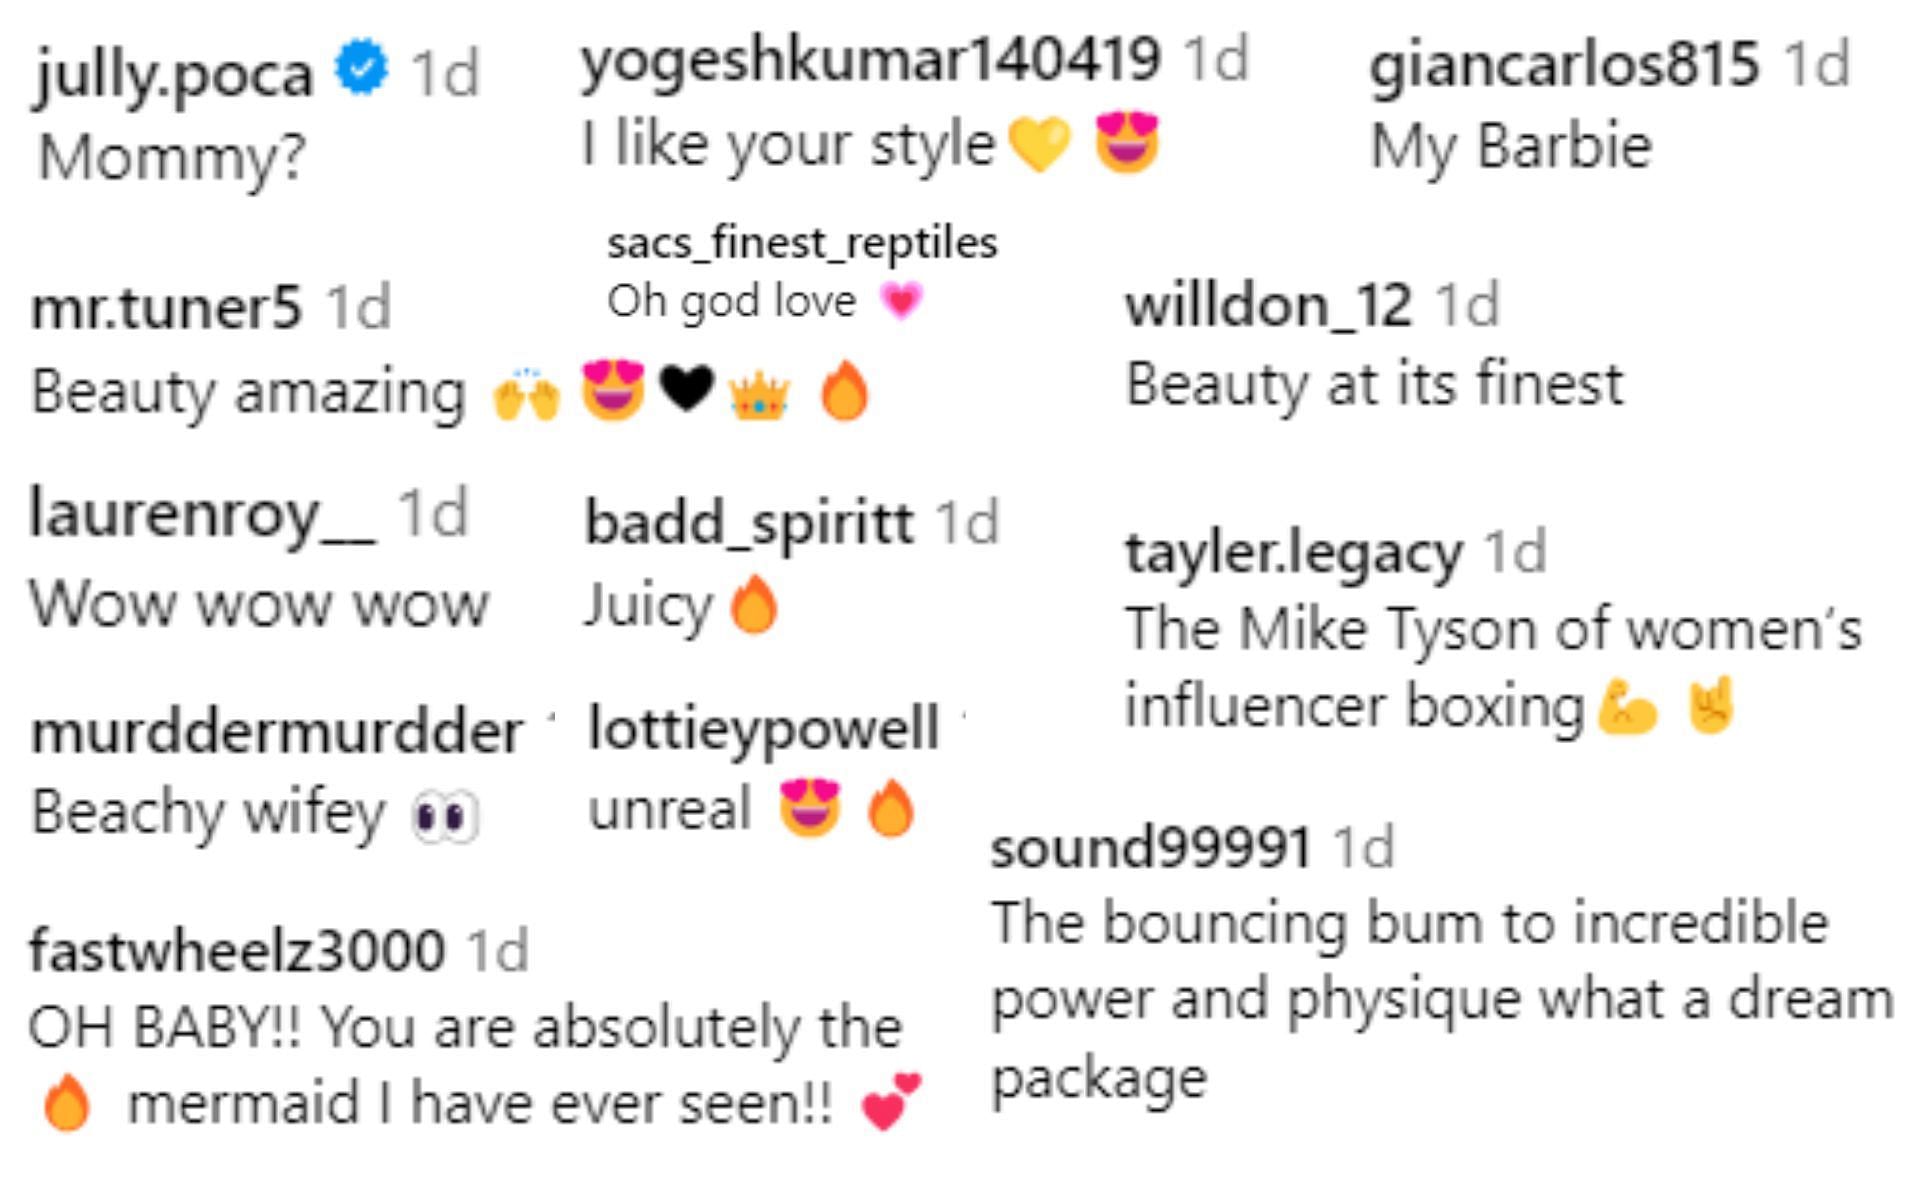 Screenshots from @thedumbledong on Instagram